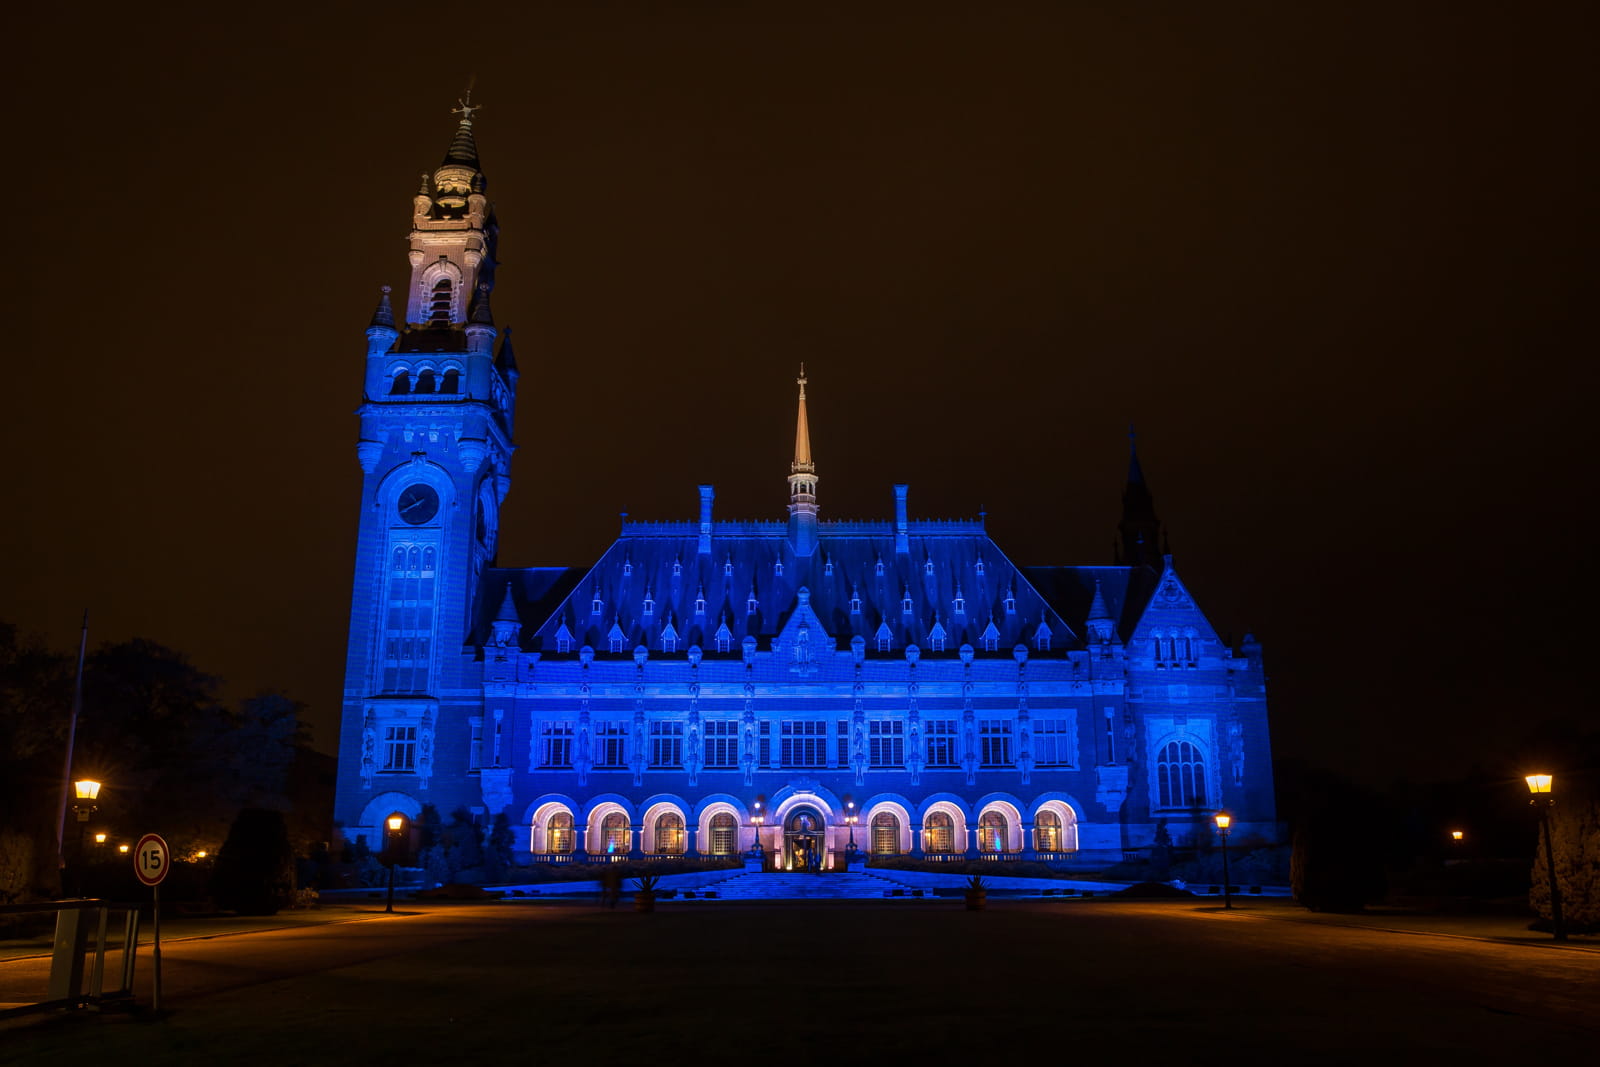 The Peace Palace, which houses the United Nations’ principle judicial organ, the International Court of Justice, The Hague, The Netherlands (Marcel Vogel/UN Information Centre/Flickr)